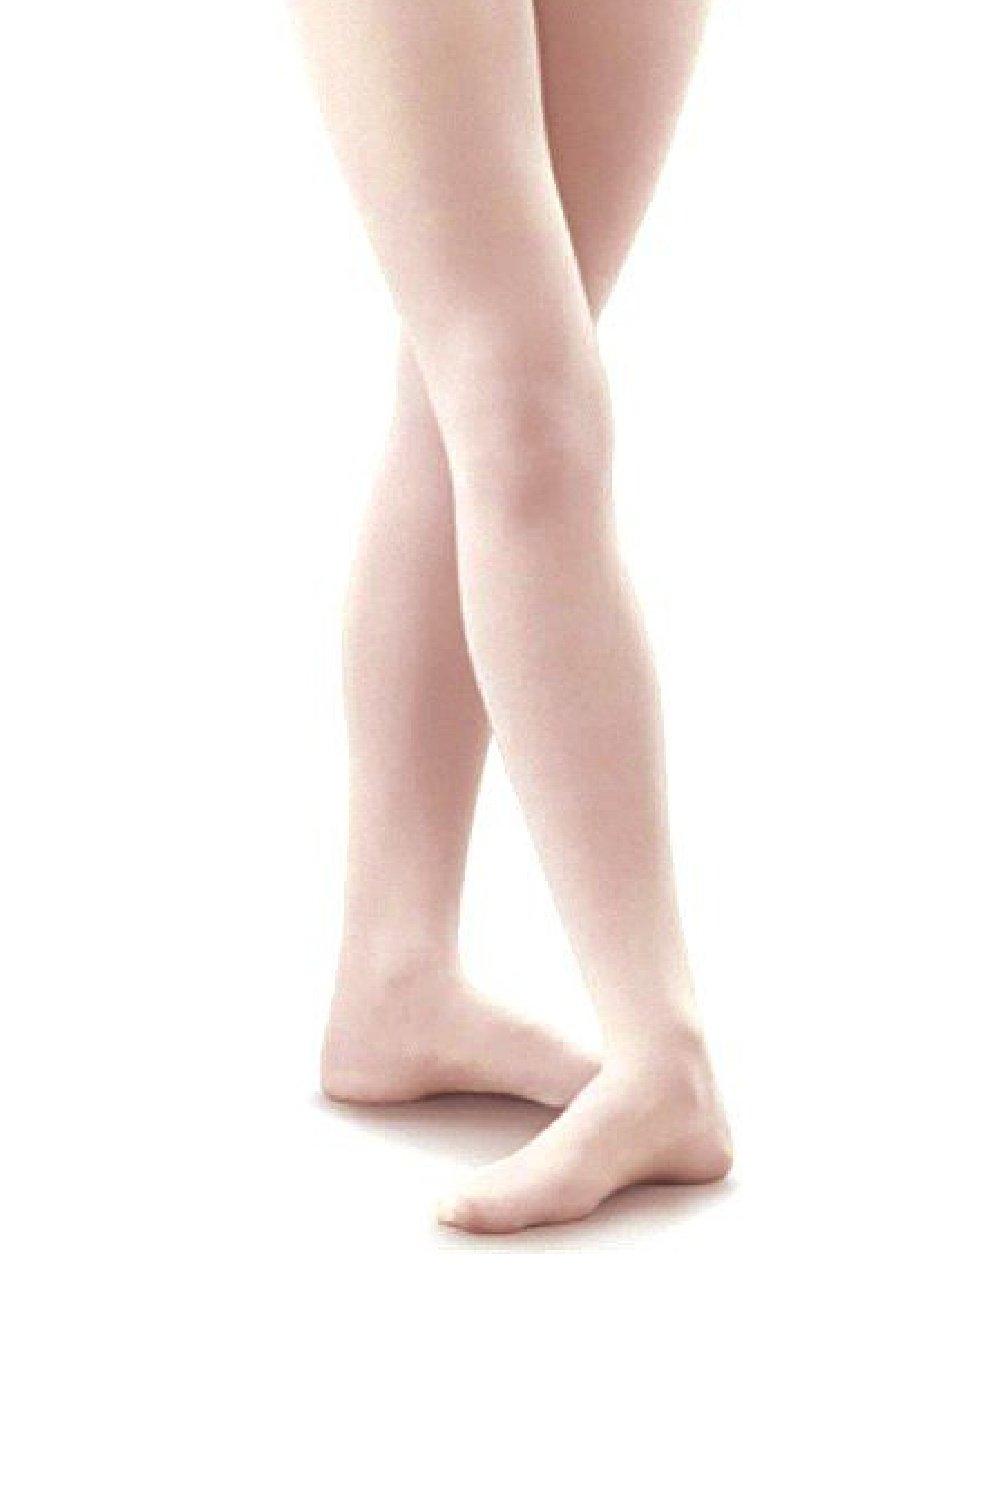 1 Pair Soft Footed Ballet Tights for